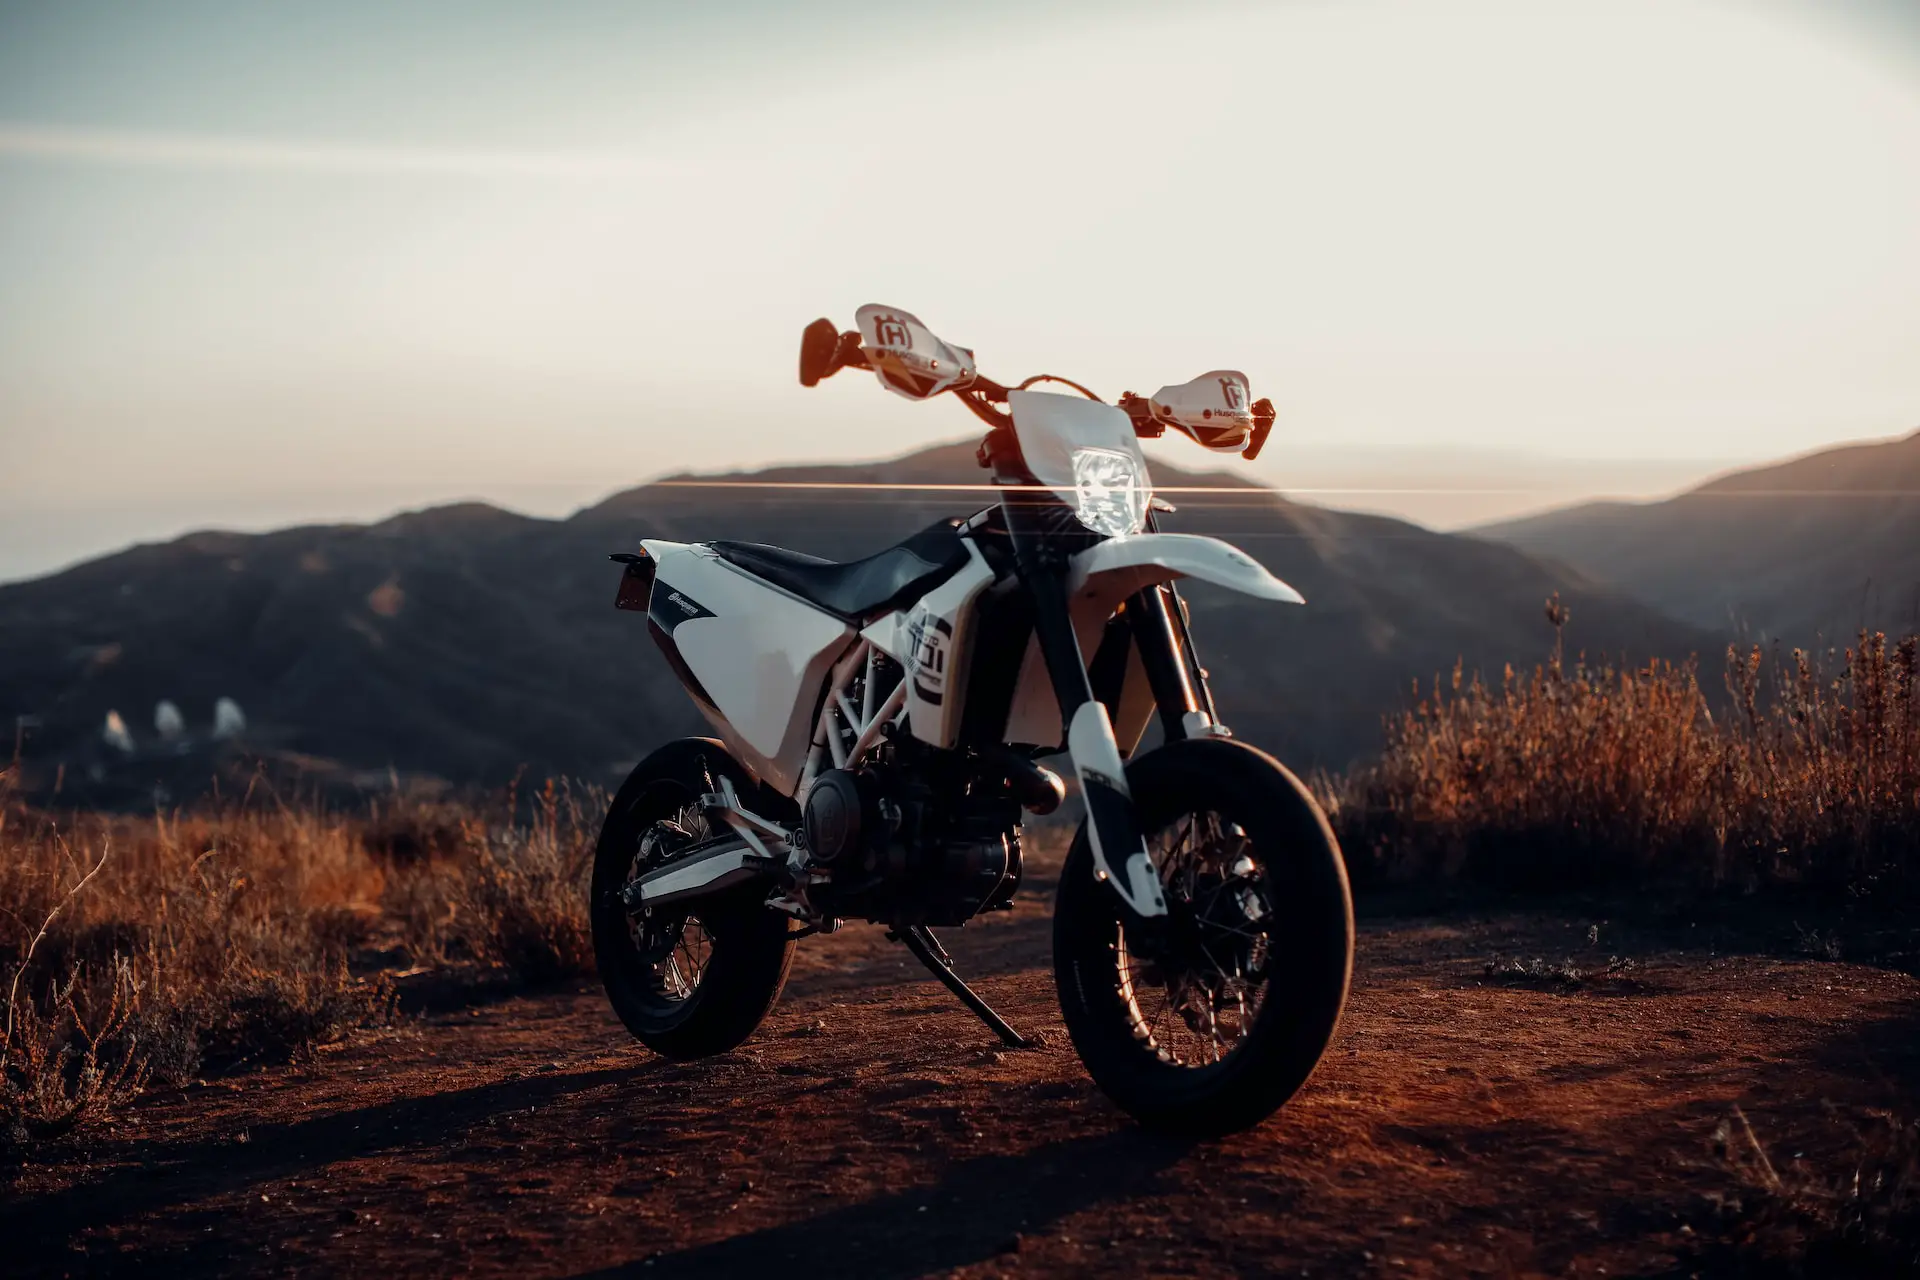 Do dirt bikes need to be registered?